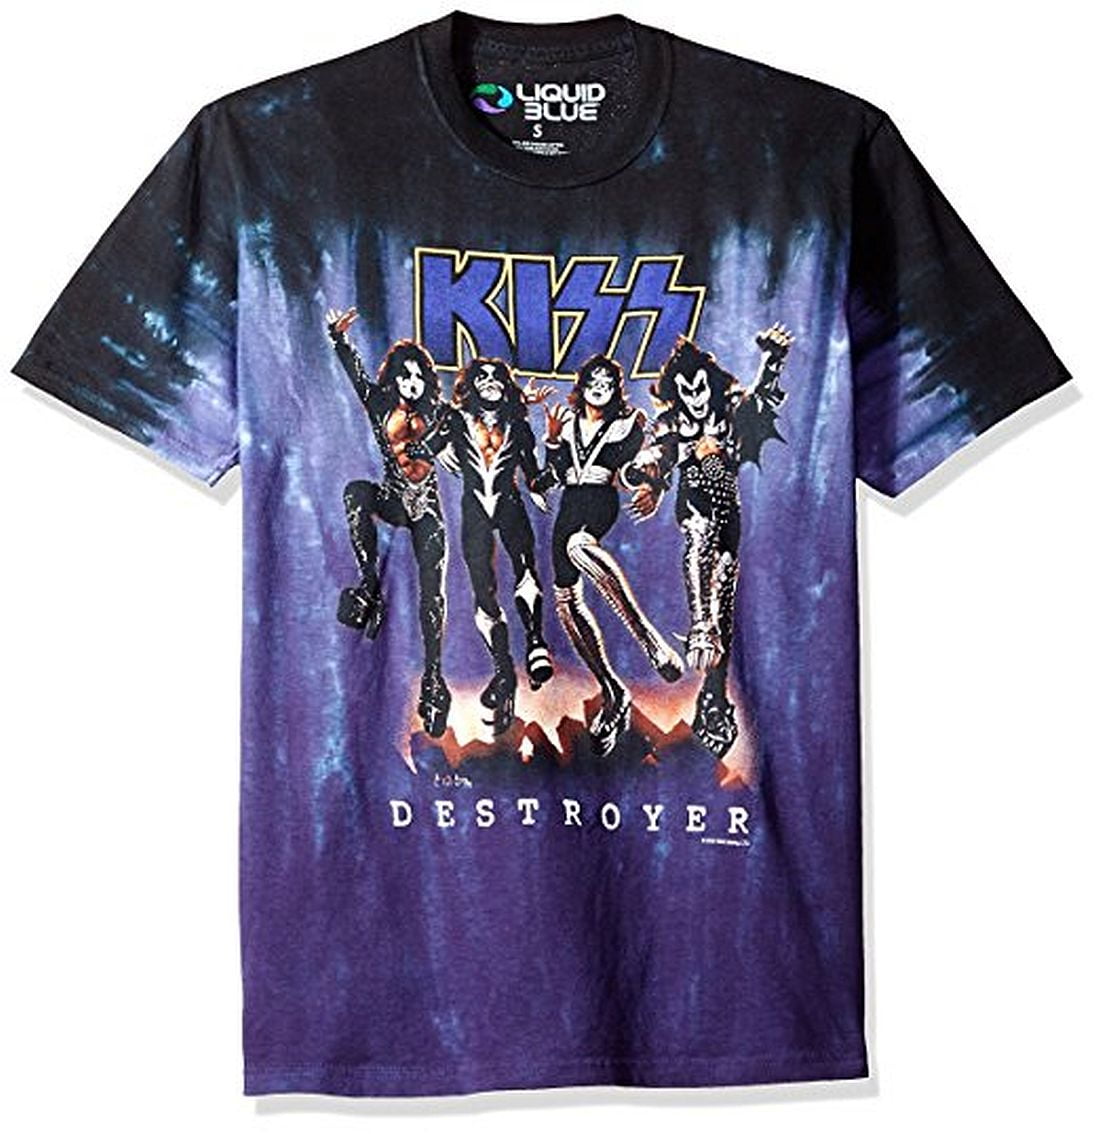 Officially Licensed Purple Tie Dye Back To The Future Graphic Tee T-Shirt New 